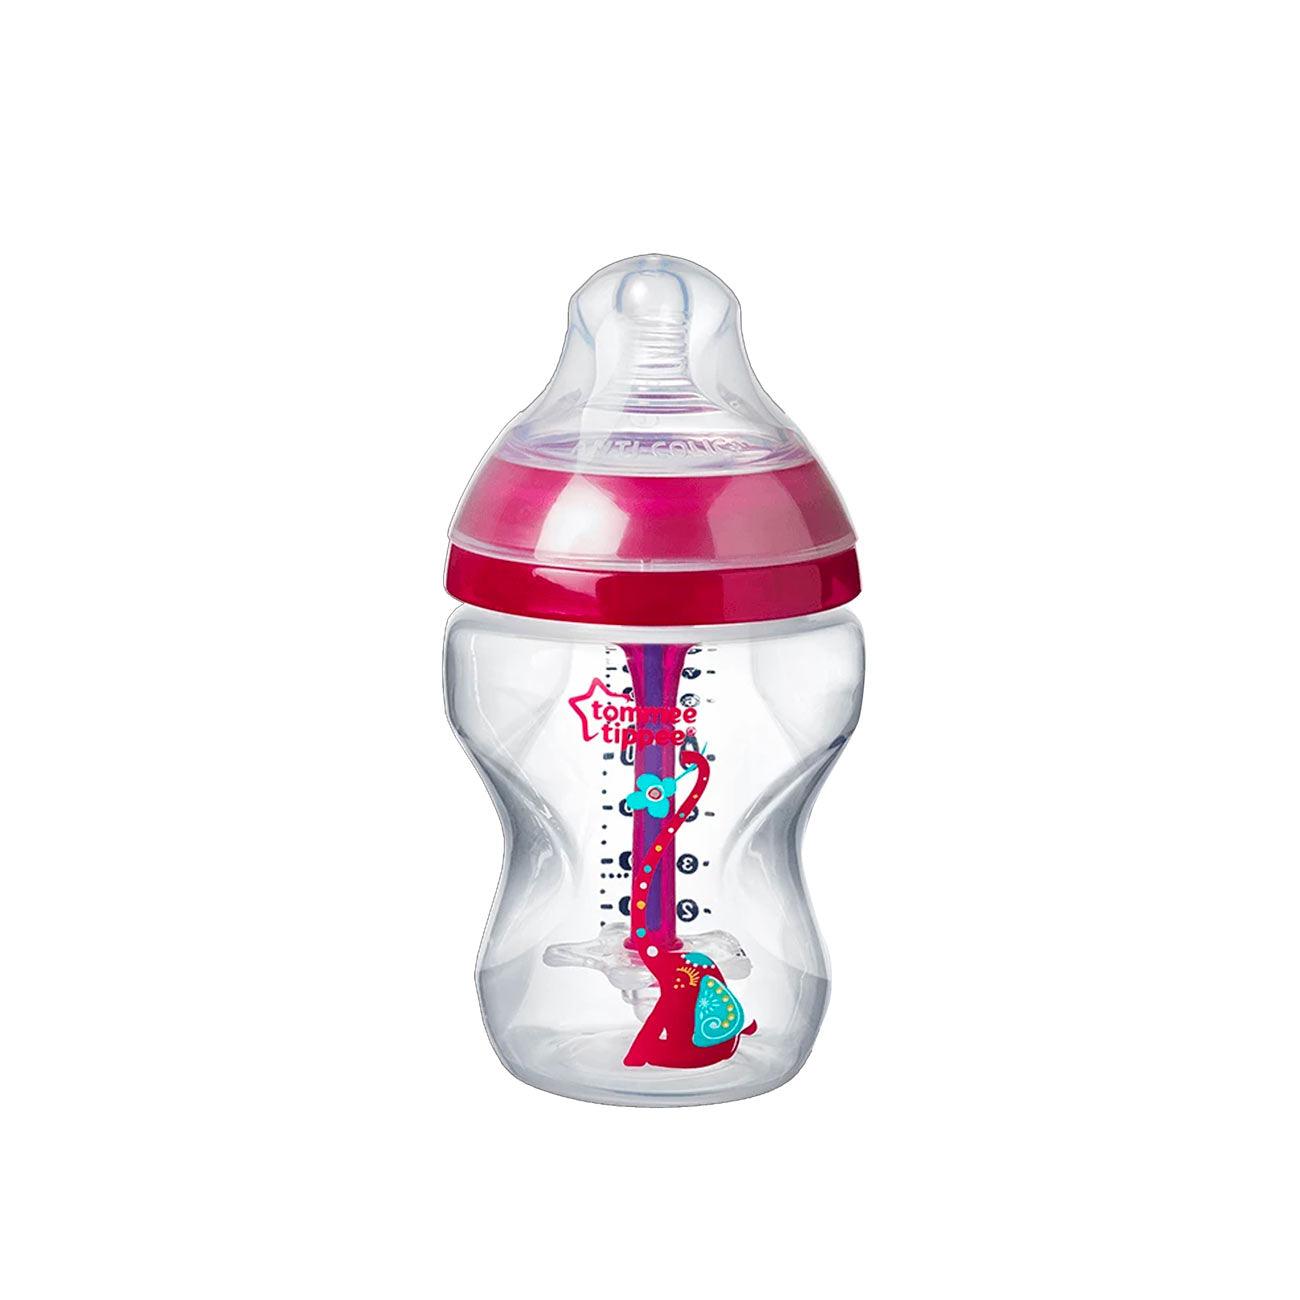 TOMMEE TIPPEE ADVANCED ANTI-COLIC BABY BOTTLE – 2 PACK - Pink 'n Blue -  Baby Boutique